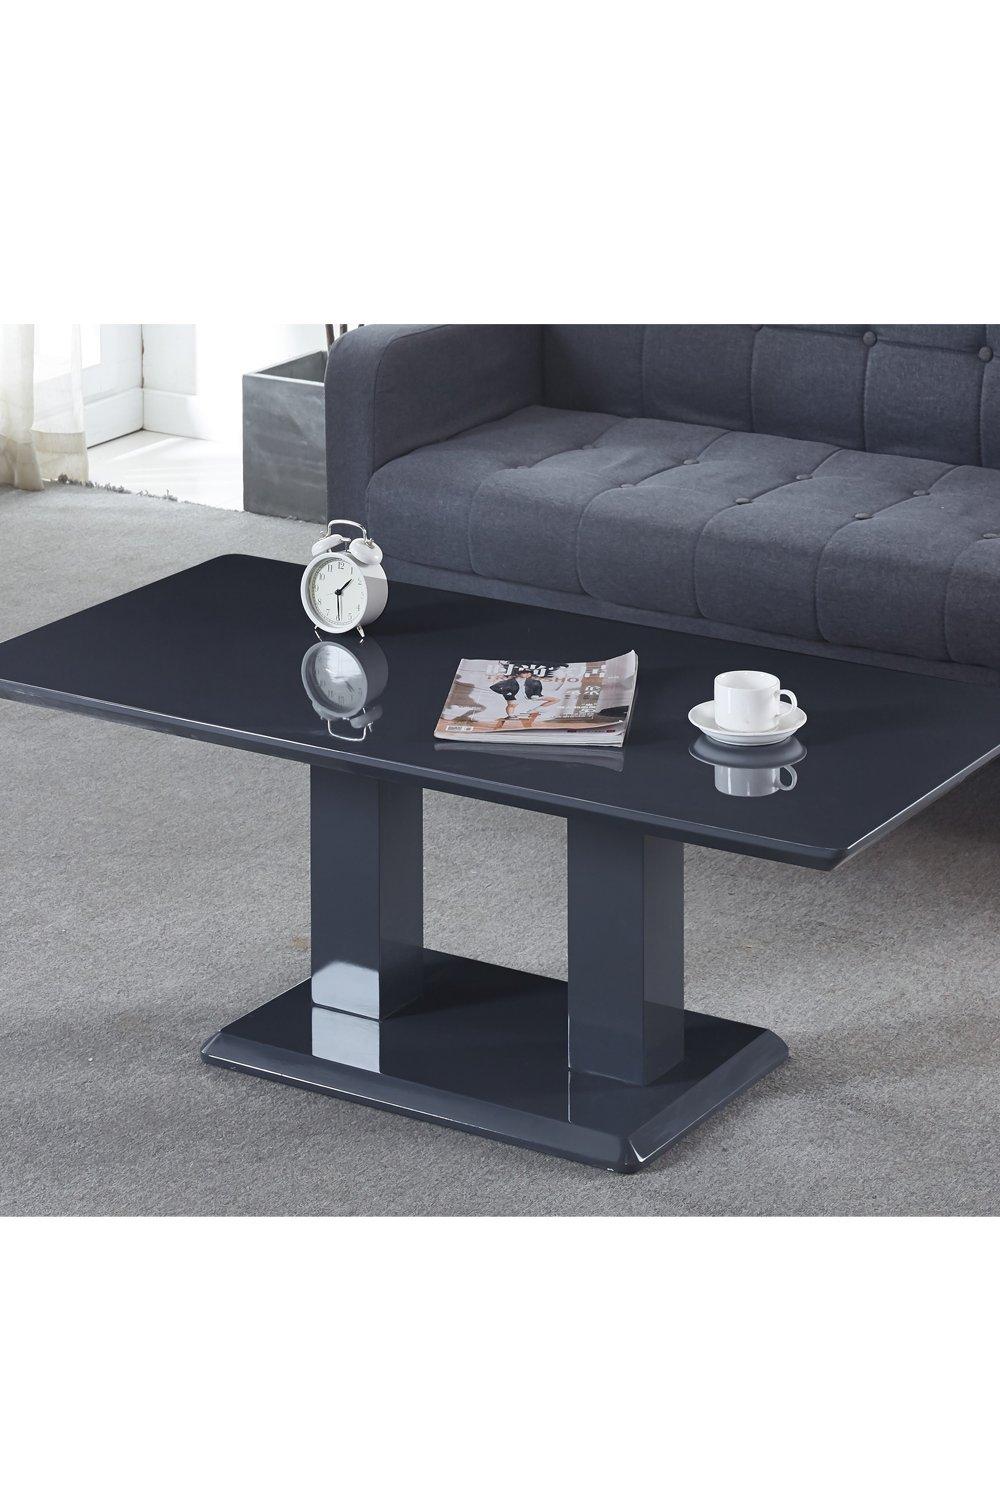 MDF Gloss Finish Coffee Table With Pedestal Stand